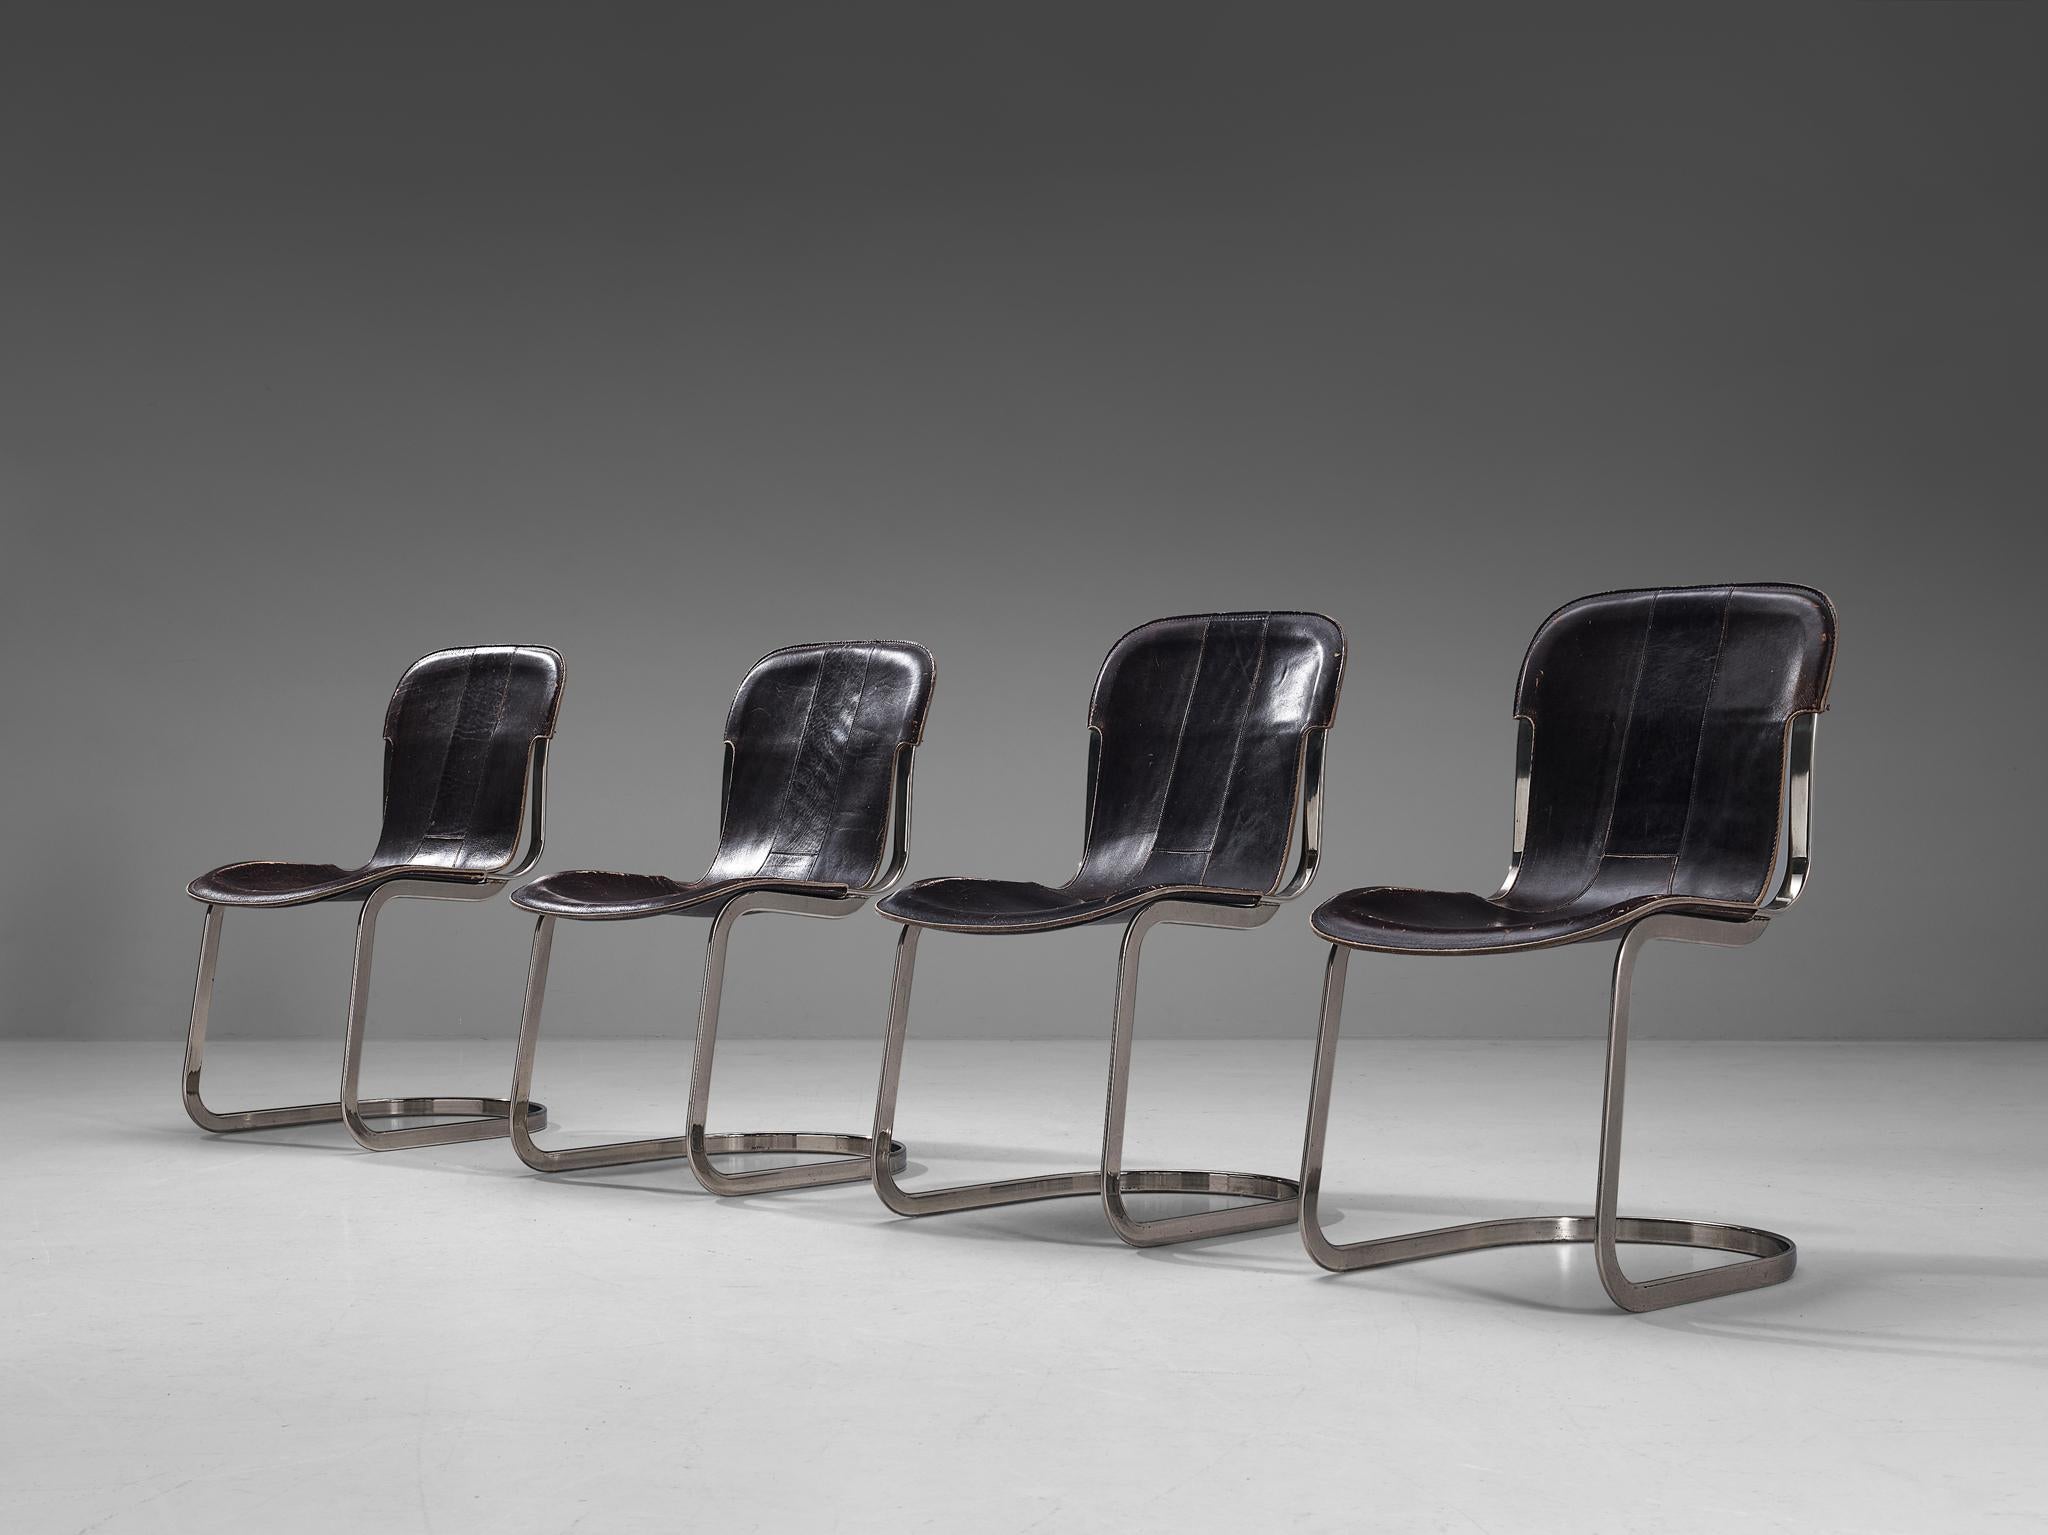 Cidue, set of four chairs, chrome, leather, Italy 1970s.

Cantilevered dining room chairs with chromed flat tubular steel frame. The seating and back are from thick dark brown colored saddle leather. The leather shows a nice all-over patina, which